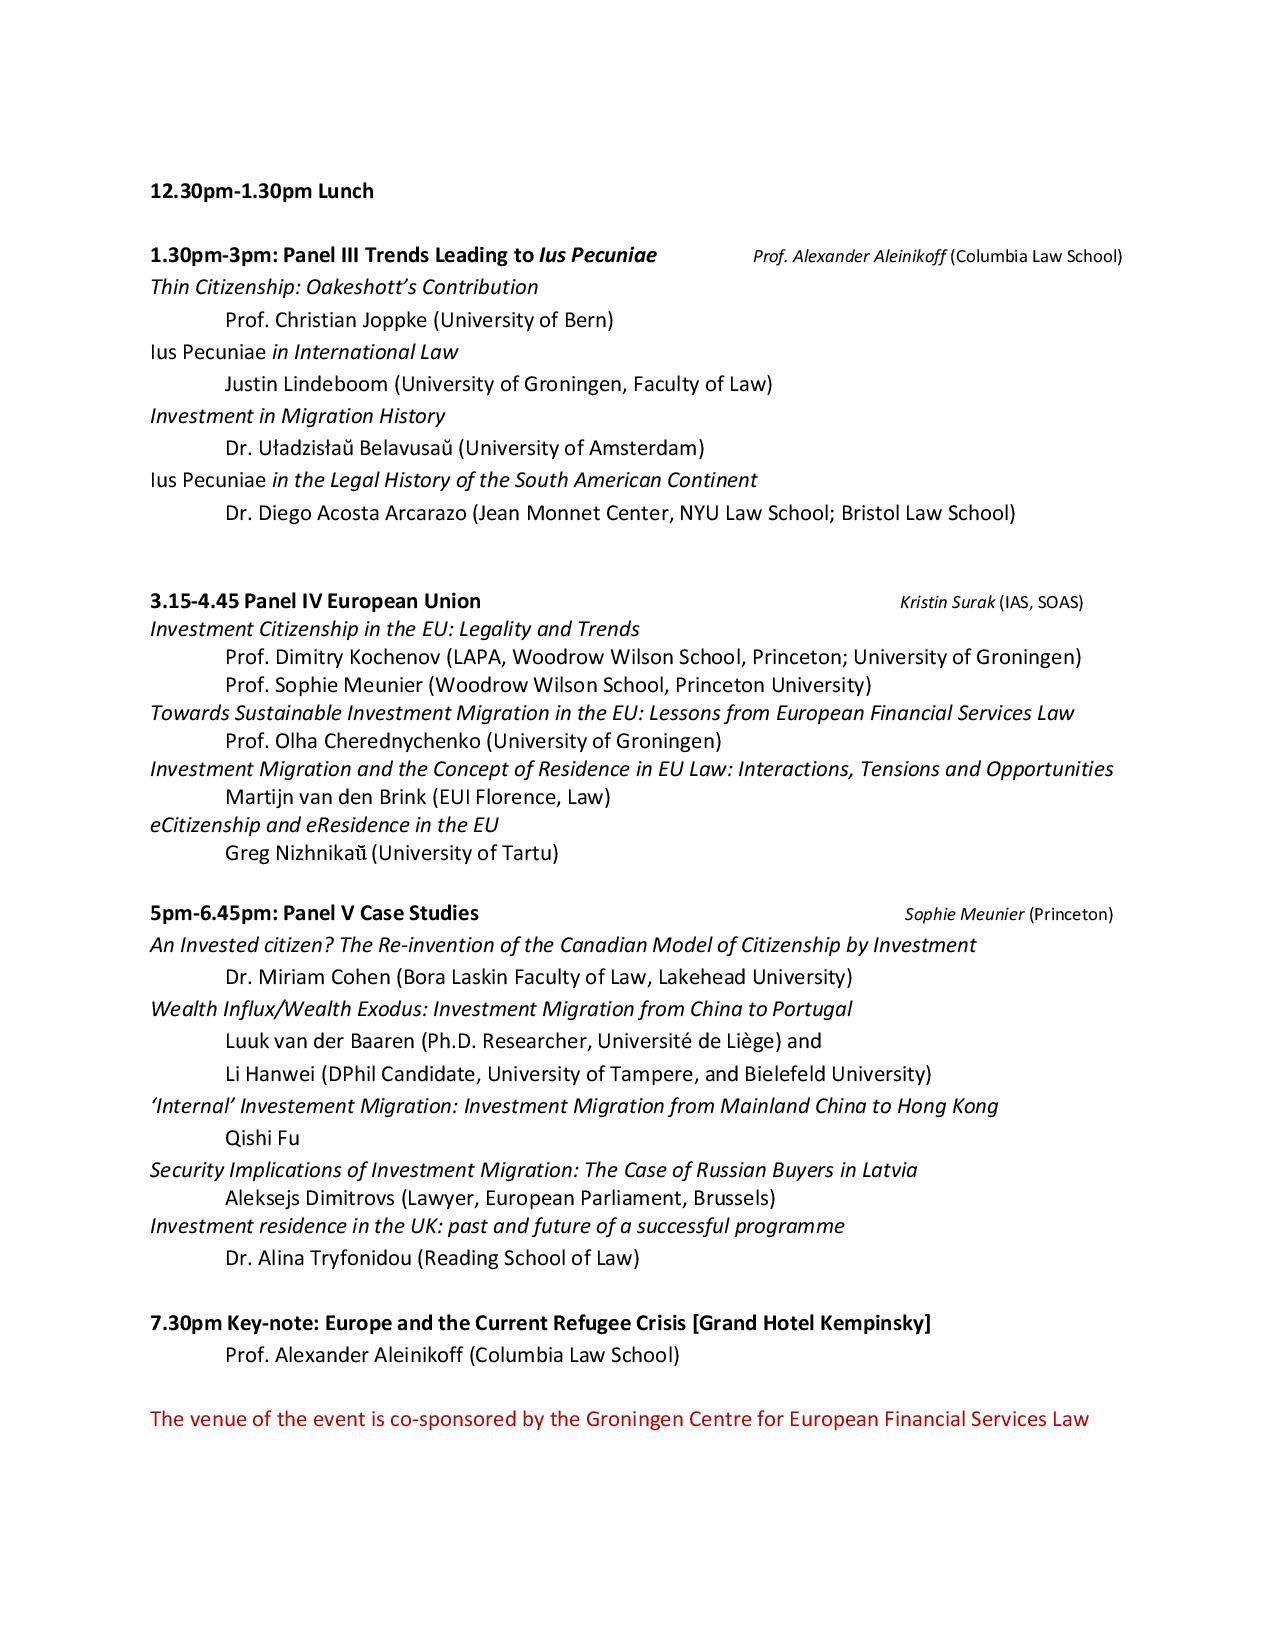 Conference Programme (II)